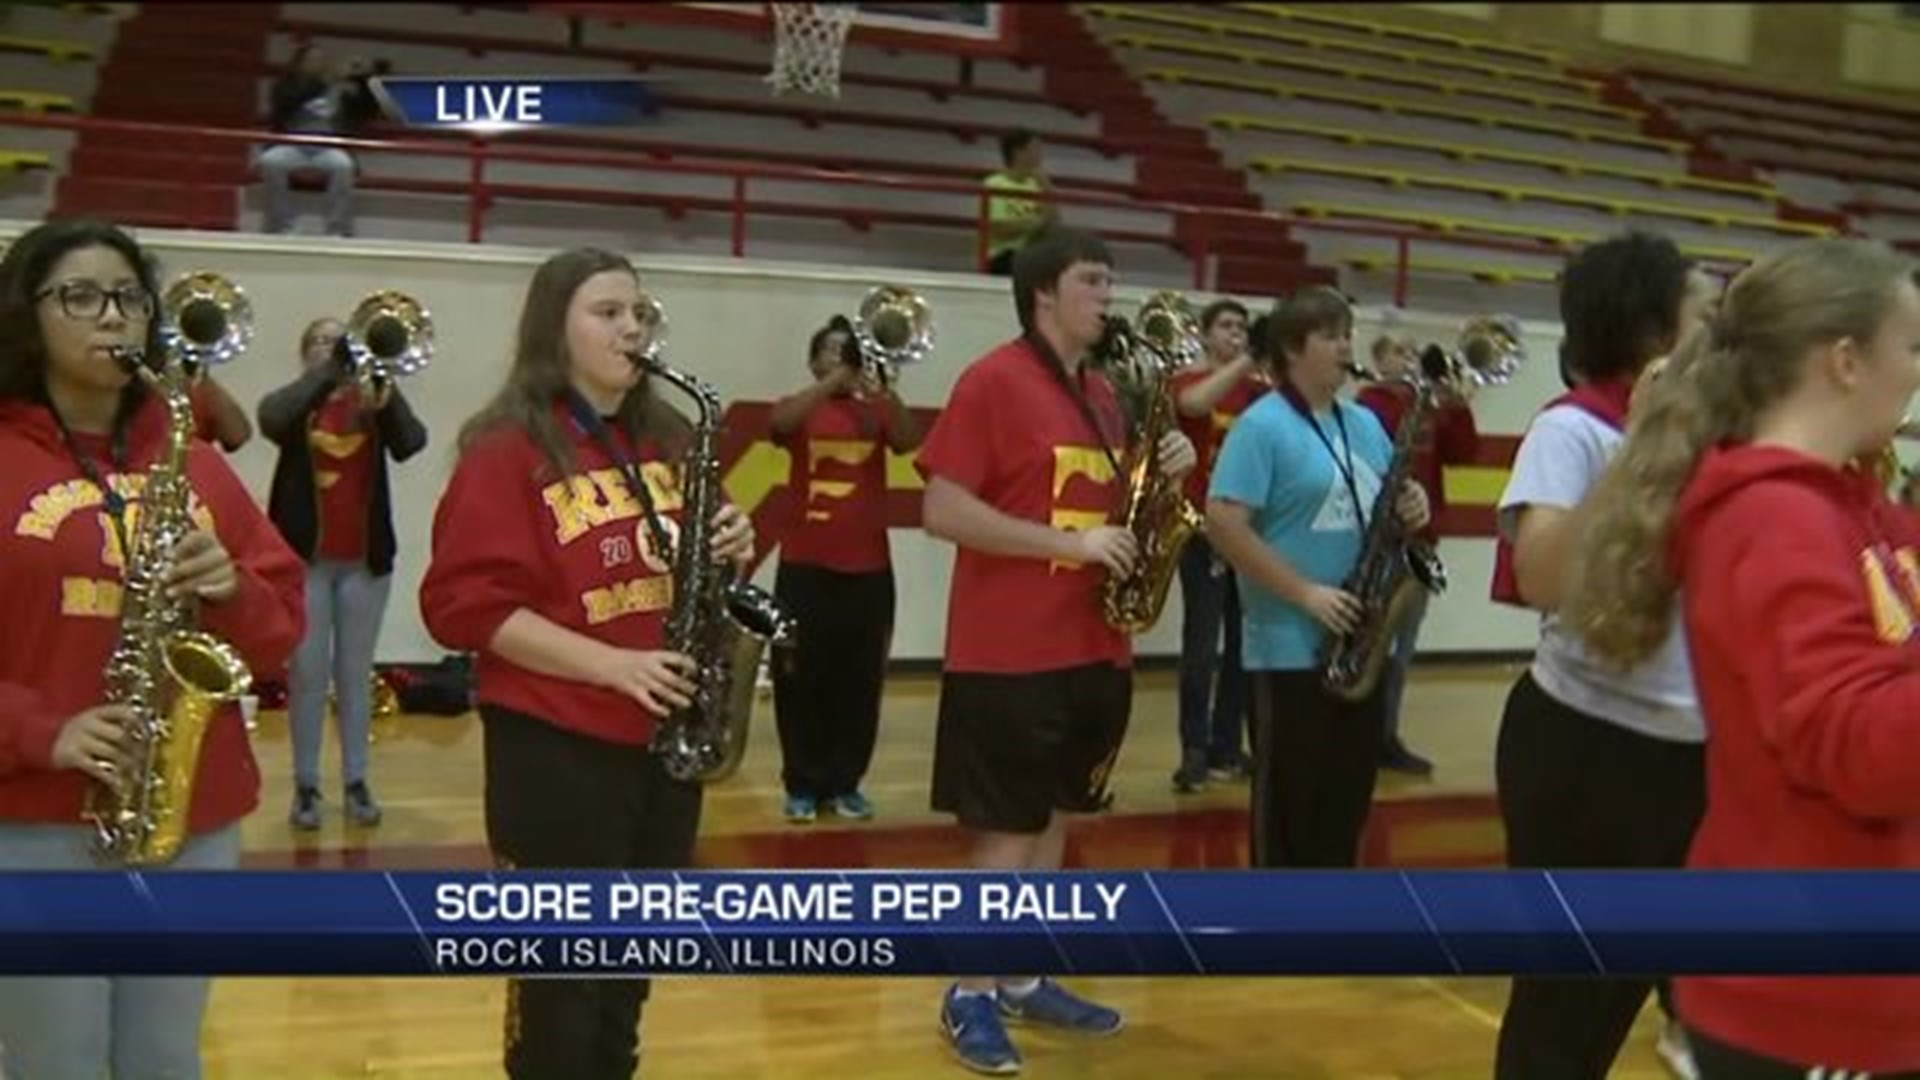 GMQC Score Pre-Game Pep Rally: Part 5